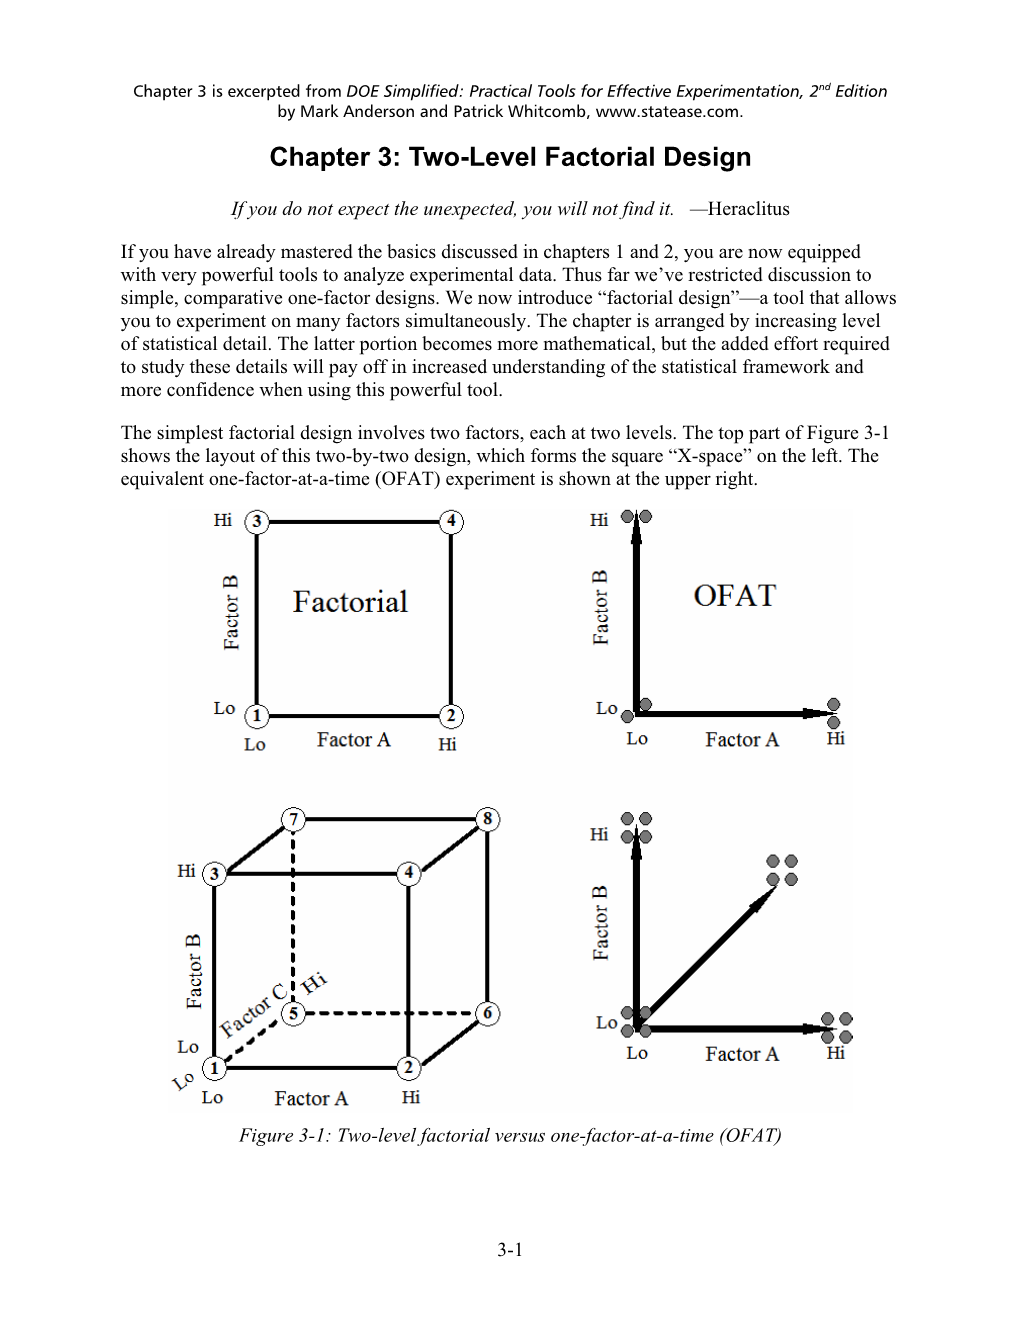 Chapter 3: Two-Level Factorial Design